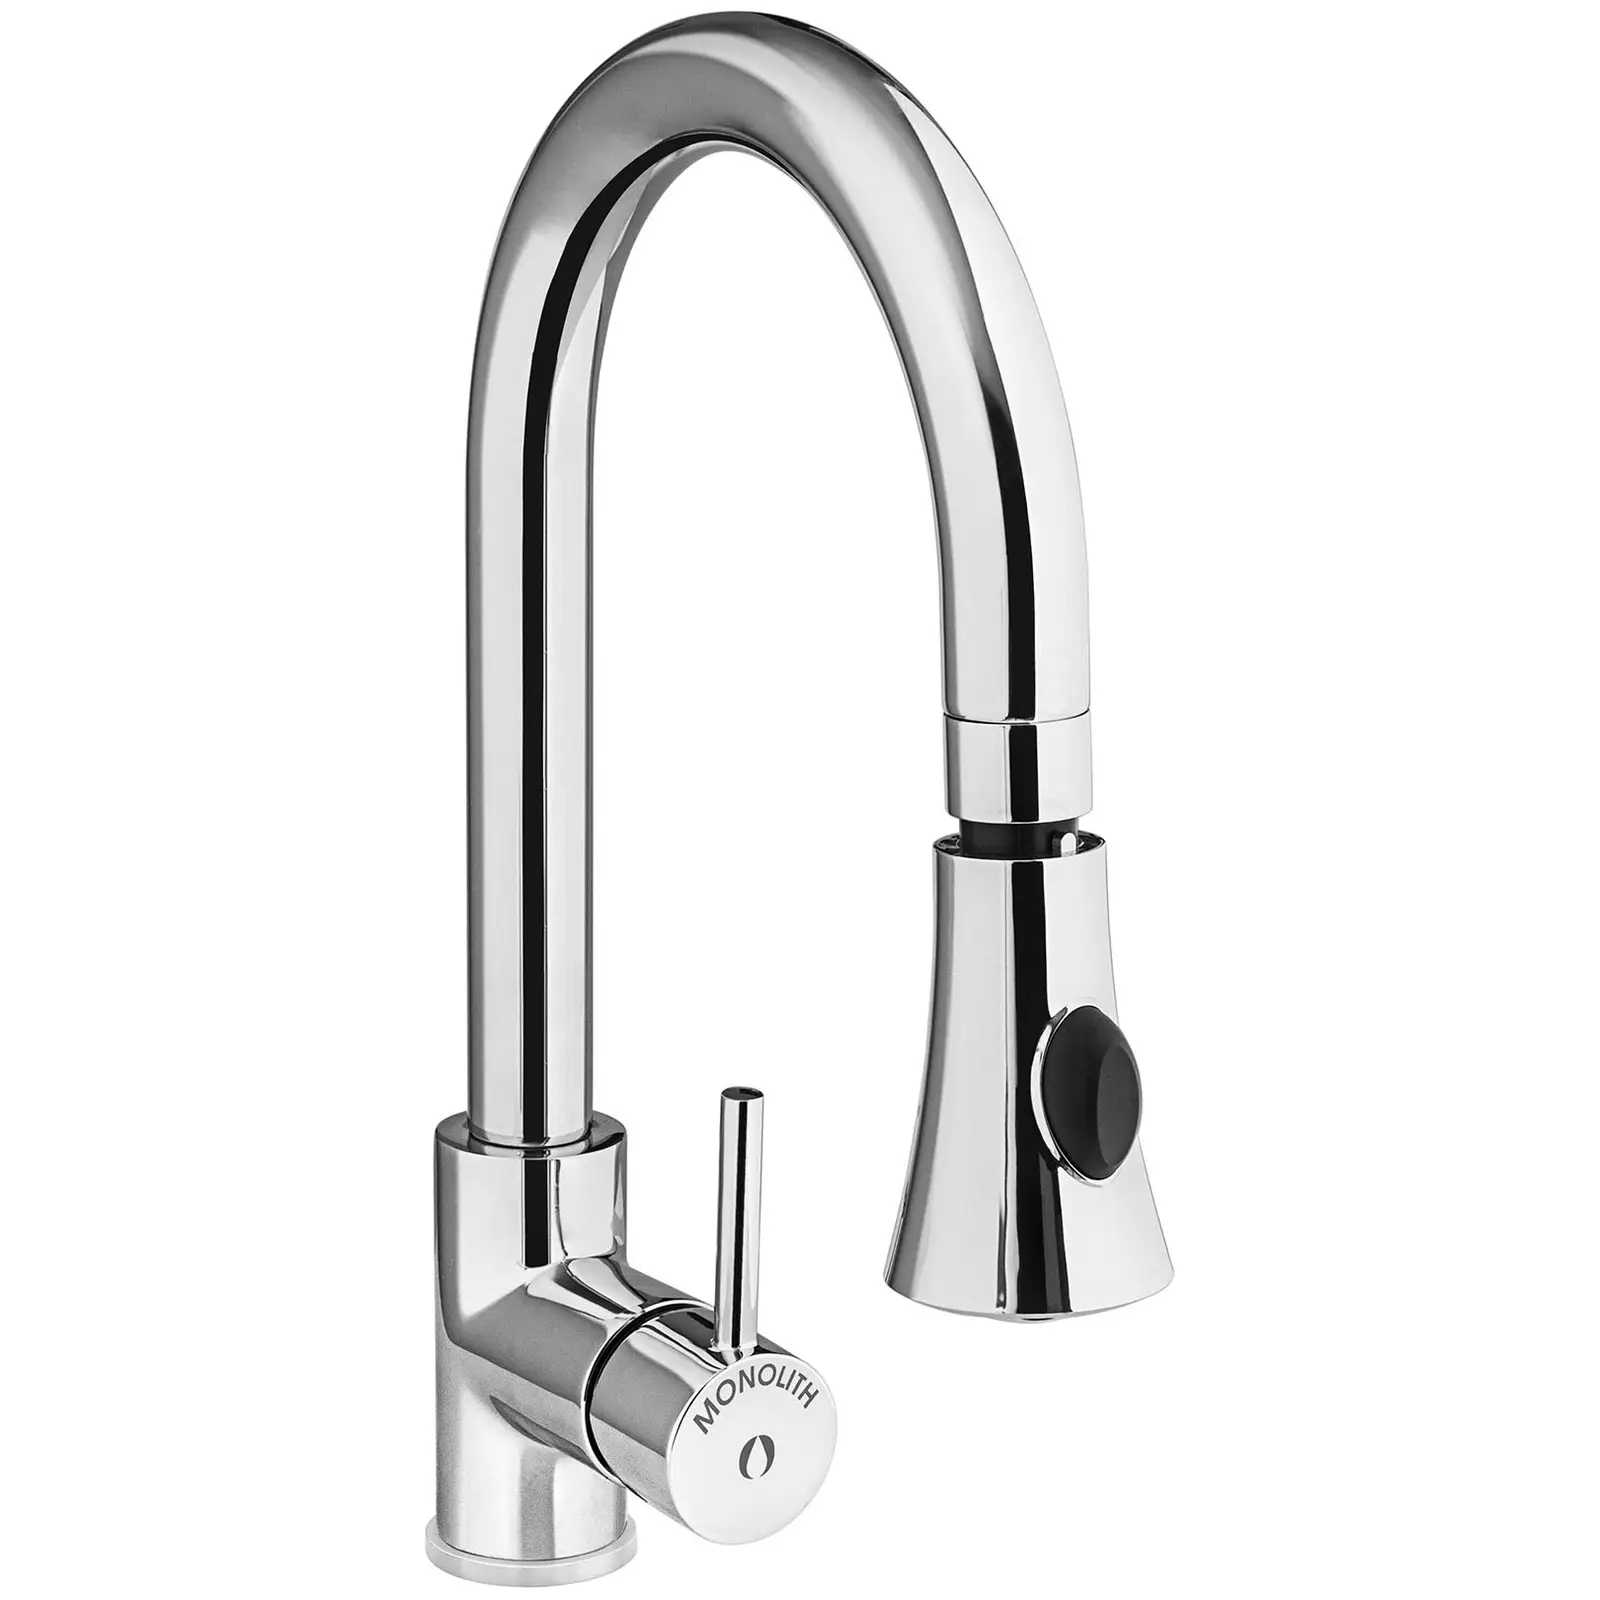 kitchen sink tap - integrated hose - Chrome-plated brass - 1200 mm hose